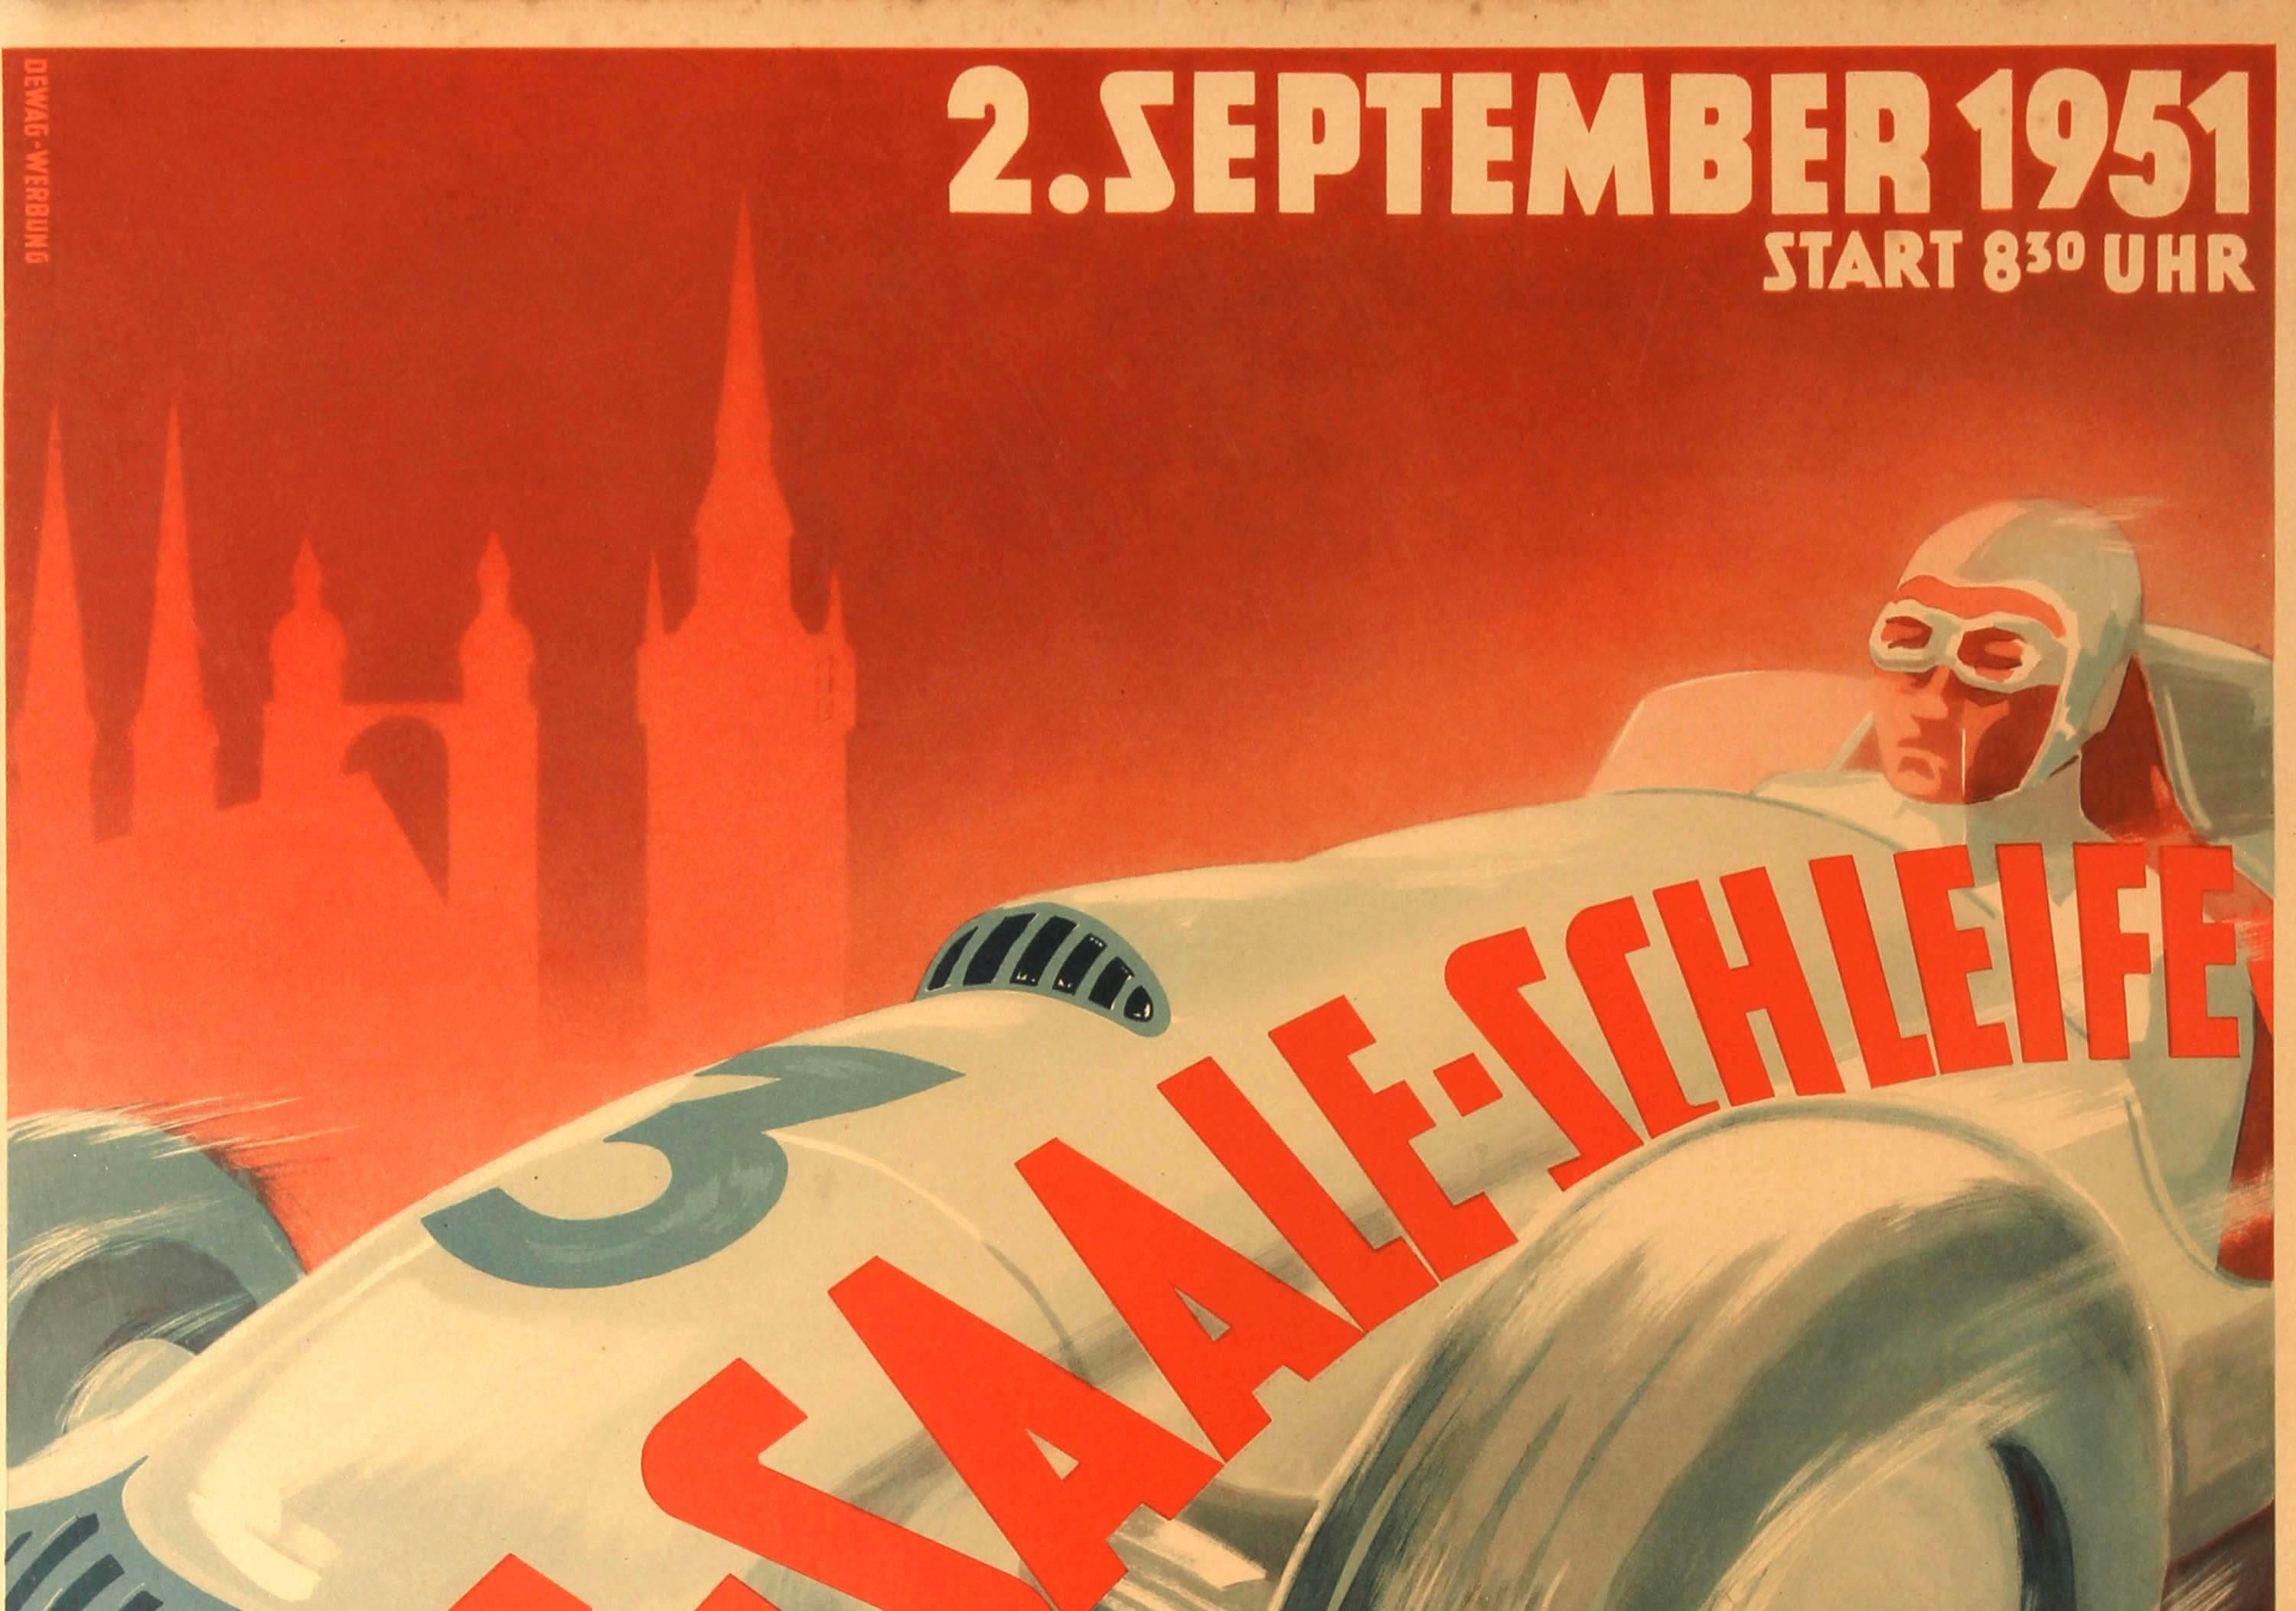 Original Vintage Motor Car Racing Event Poster For The 1951 Halle Saale Schleife - Print by Unknown